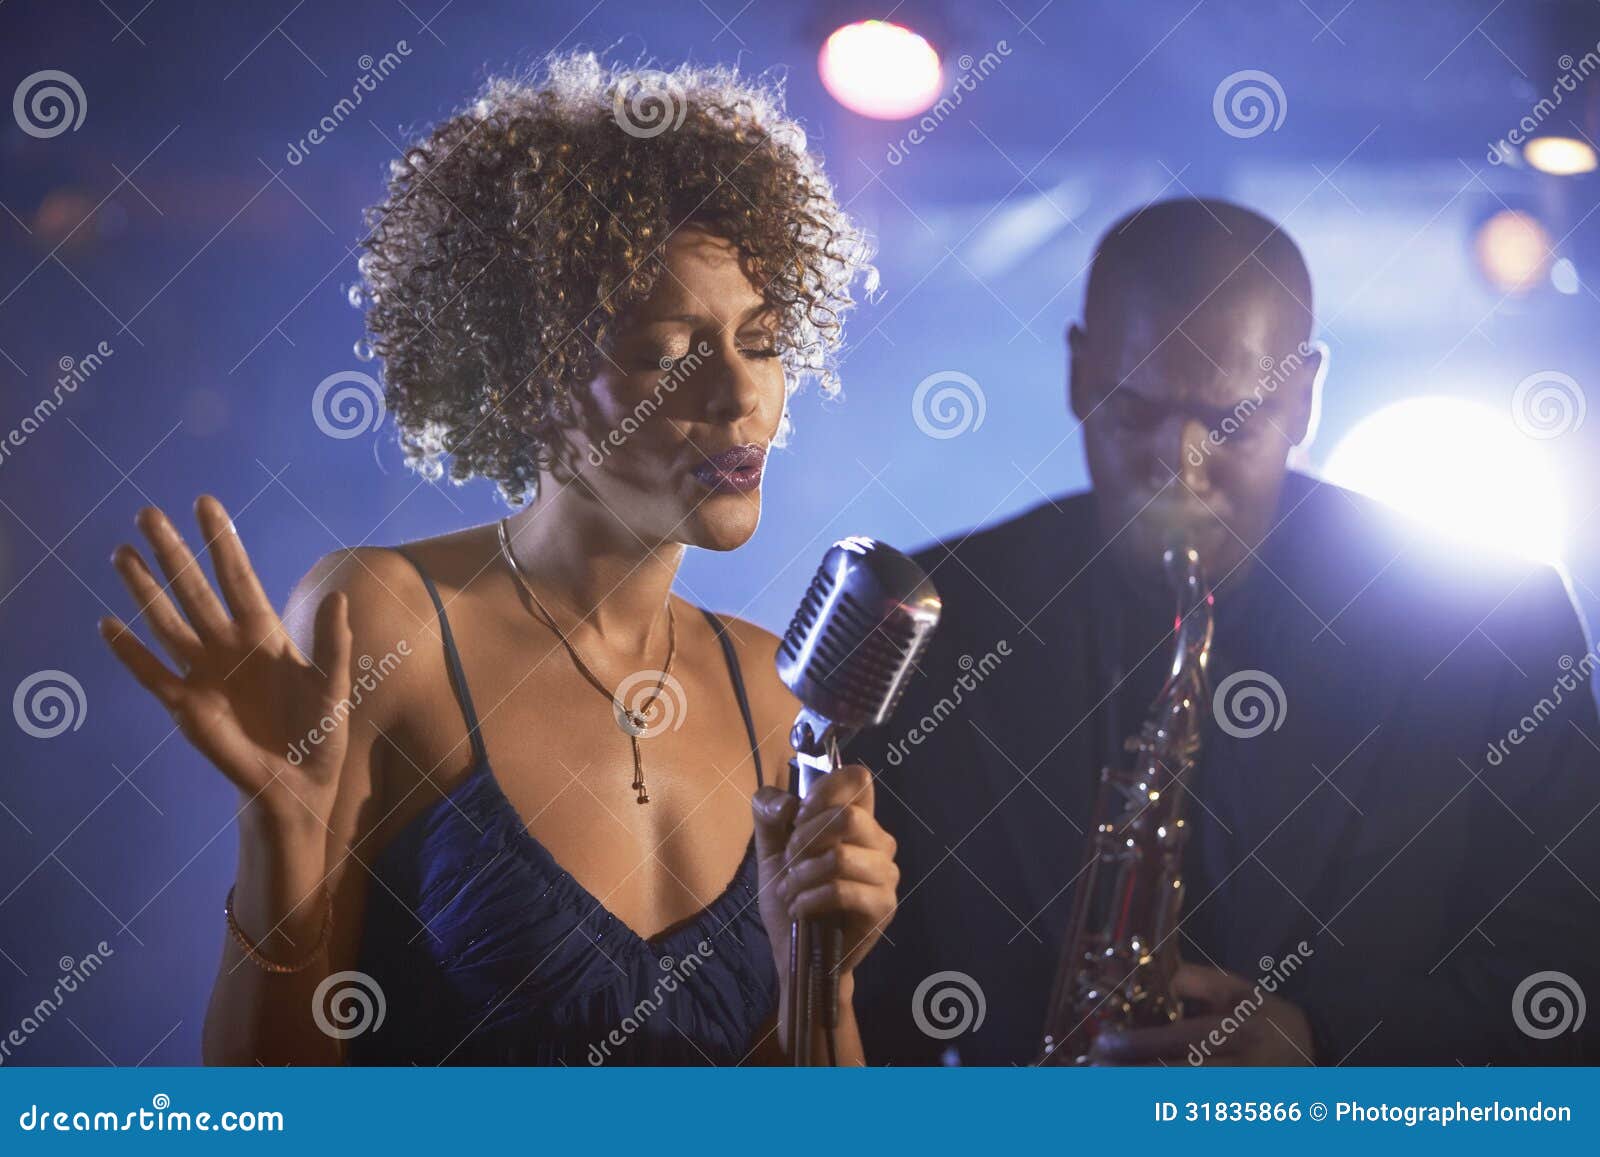 jazz singer and saxophonist in performance